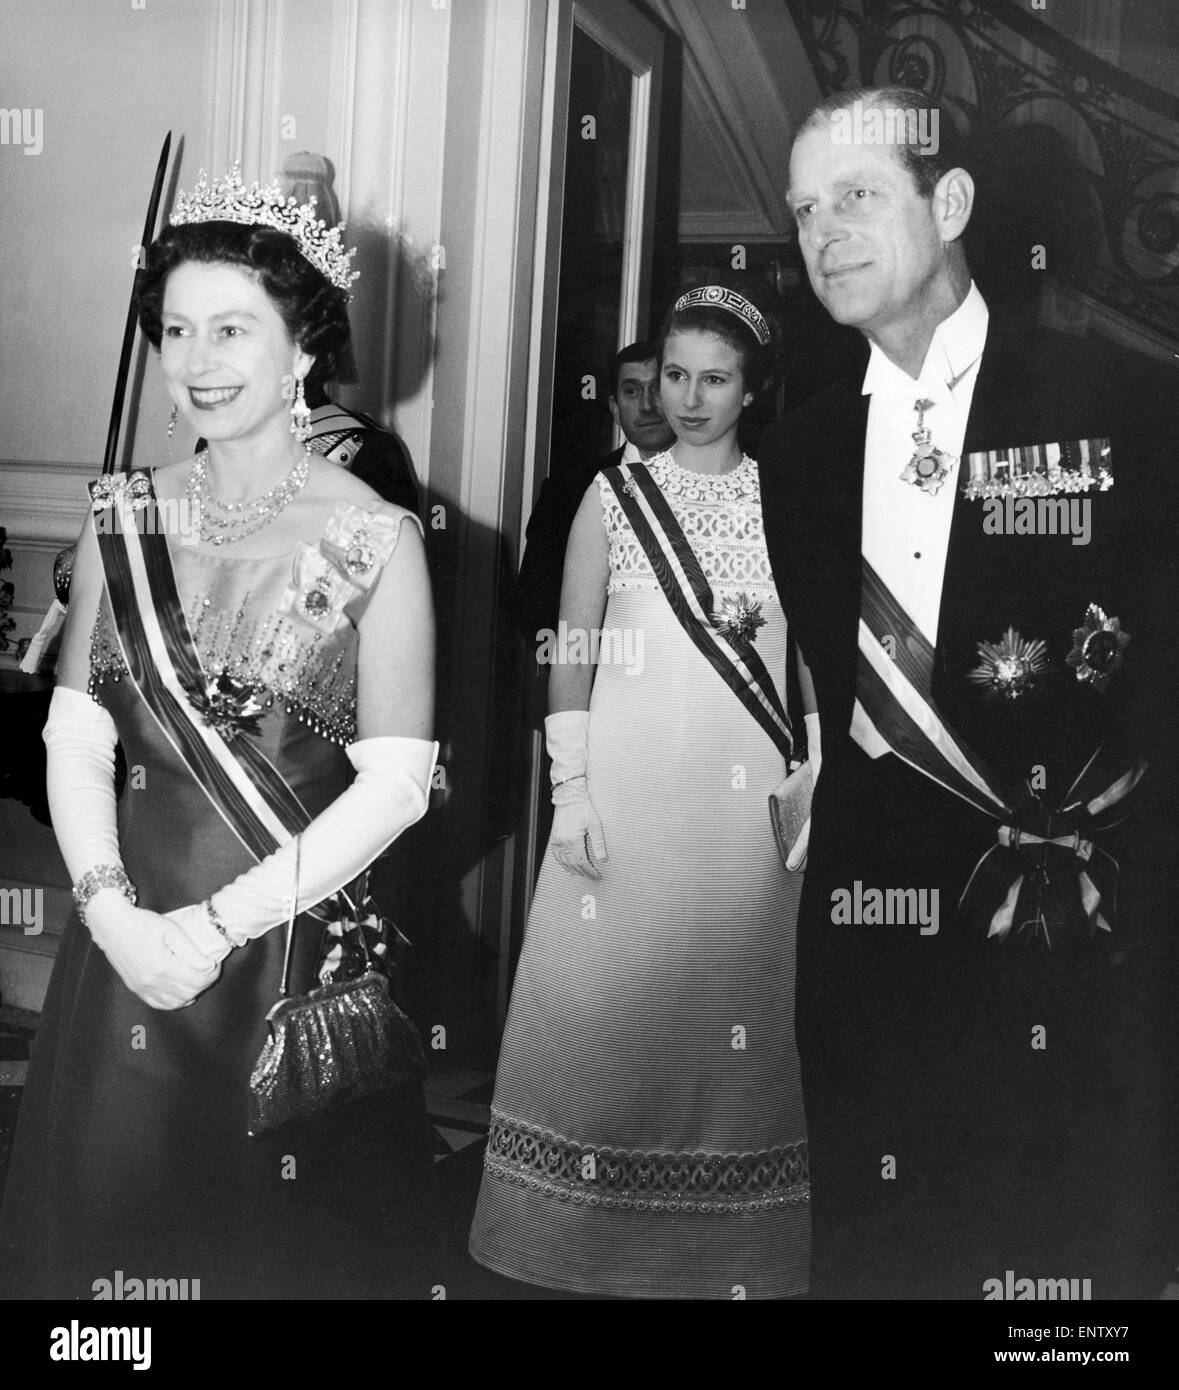 The Queen and The Duke of Edinburgh and Princess Anne at the British Embassy in Vienna wearing the Order of Merit for services to the Republic of Austria. May 1969. Stock Photo